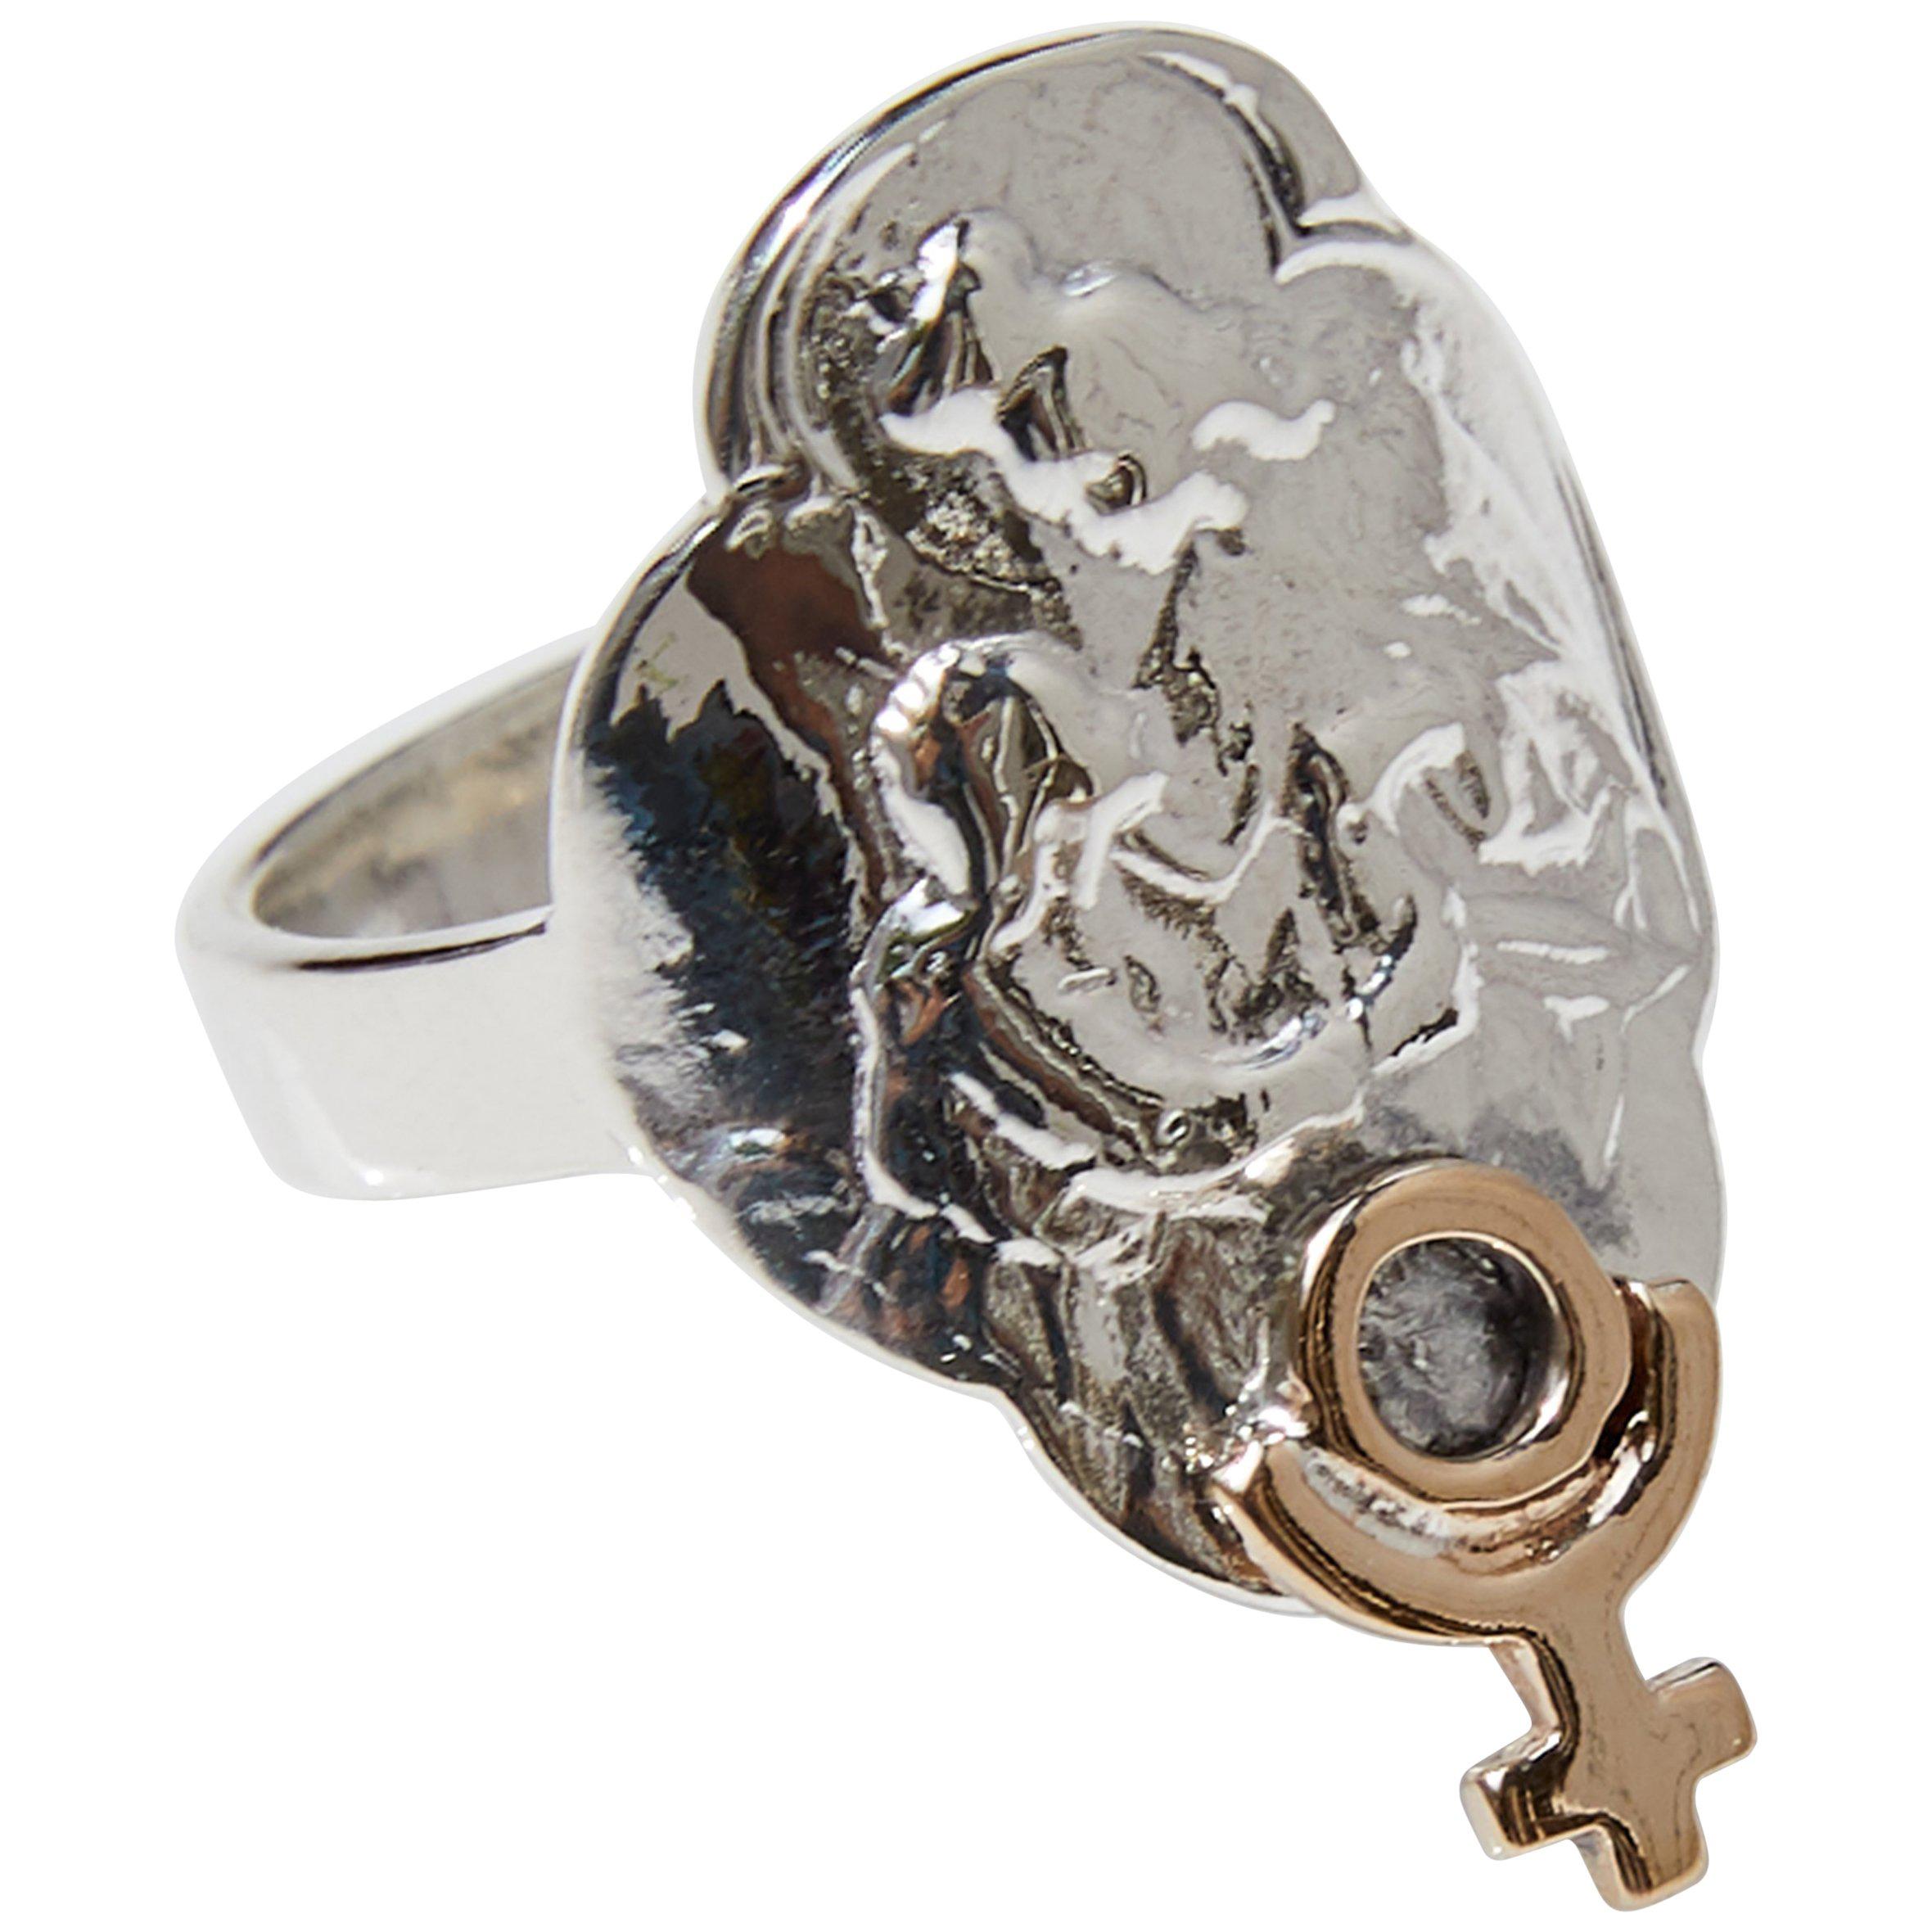 Virgin Mary Crest Ring Sterling Silver Gold Pluto Symbol Astrology J Dauphin For Sale